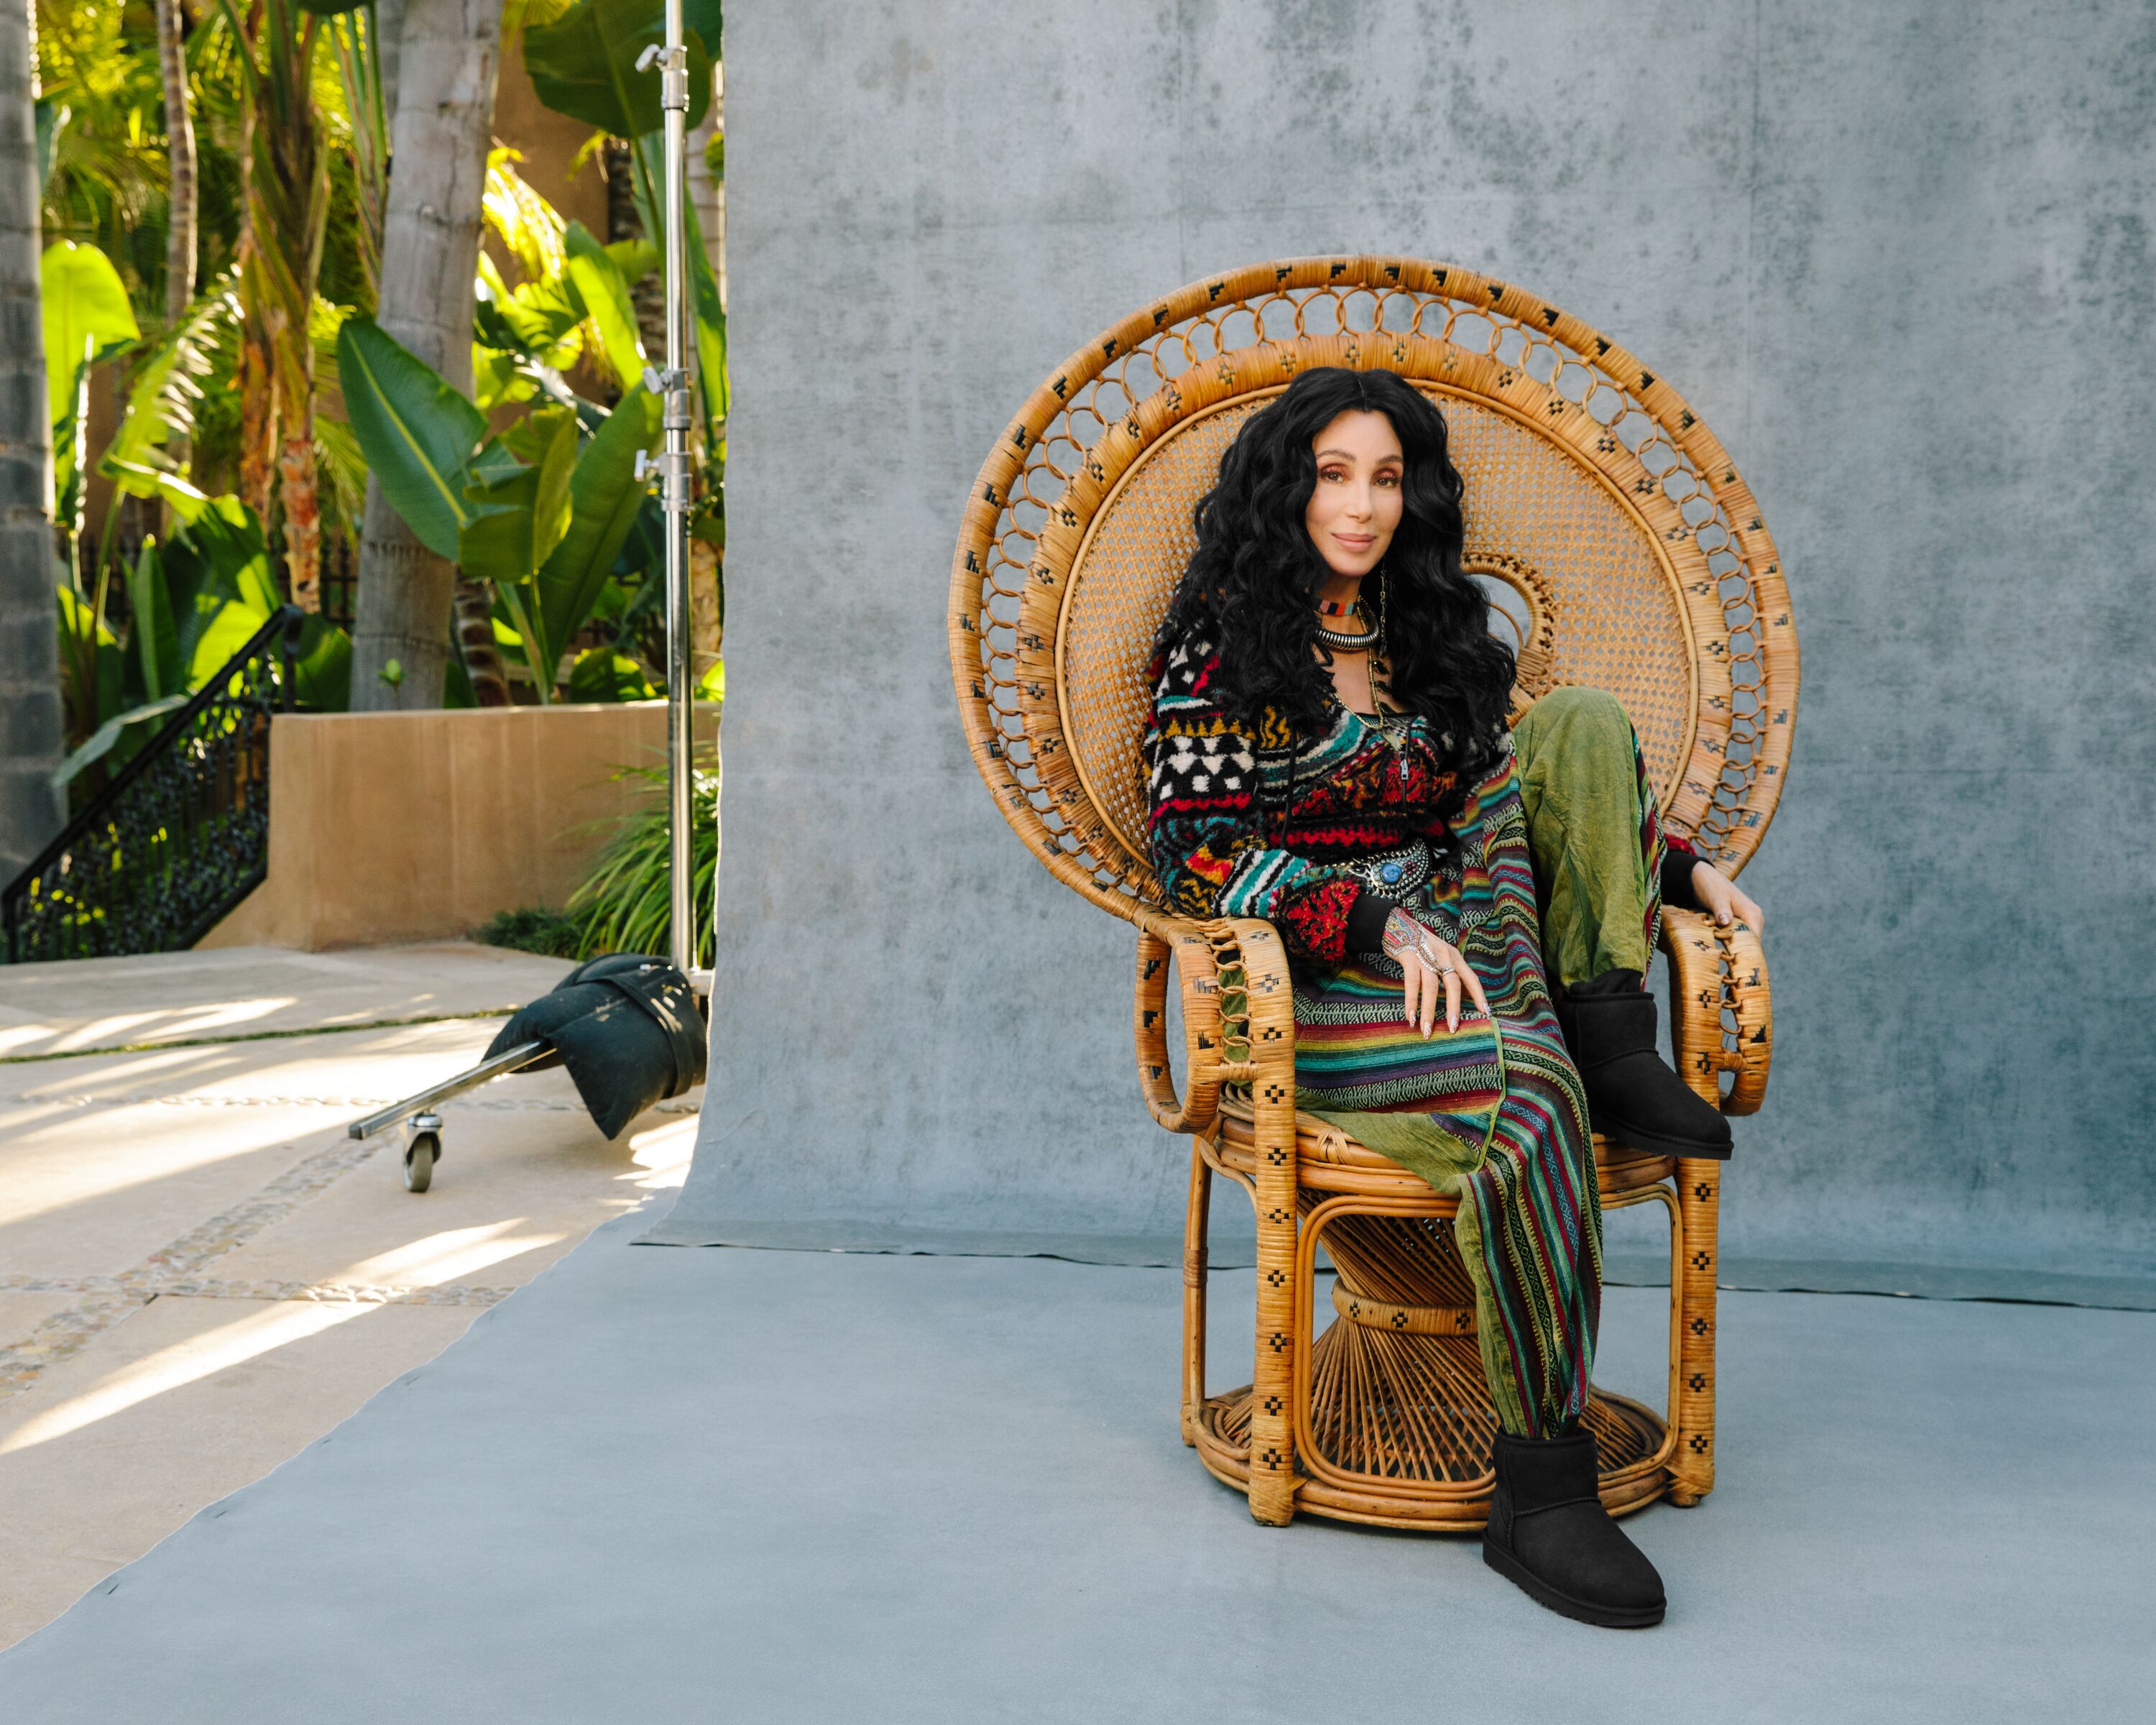 Cher in Ugg Feel campaign 2022